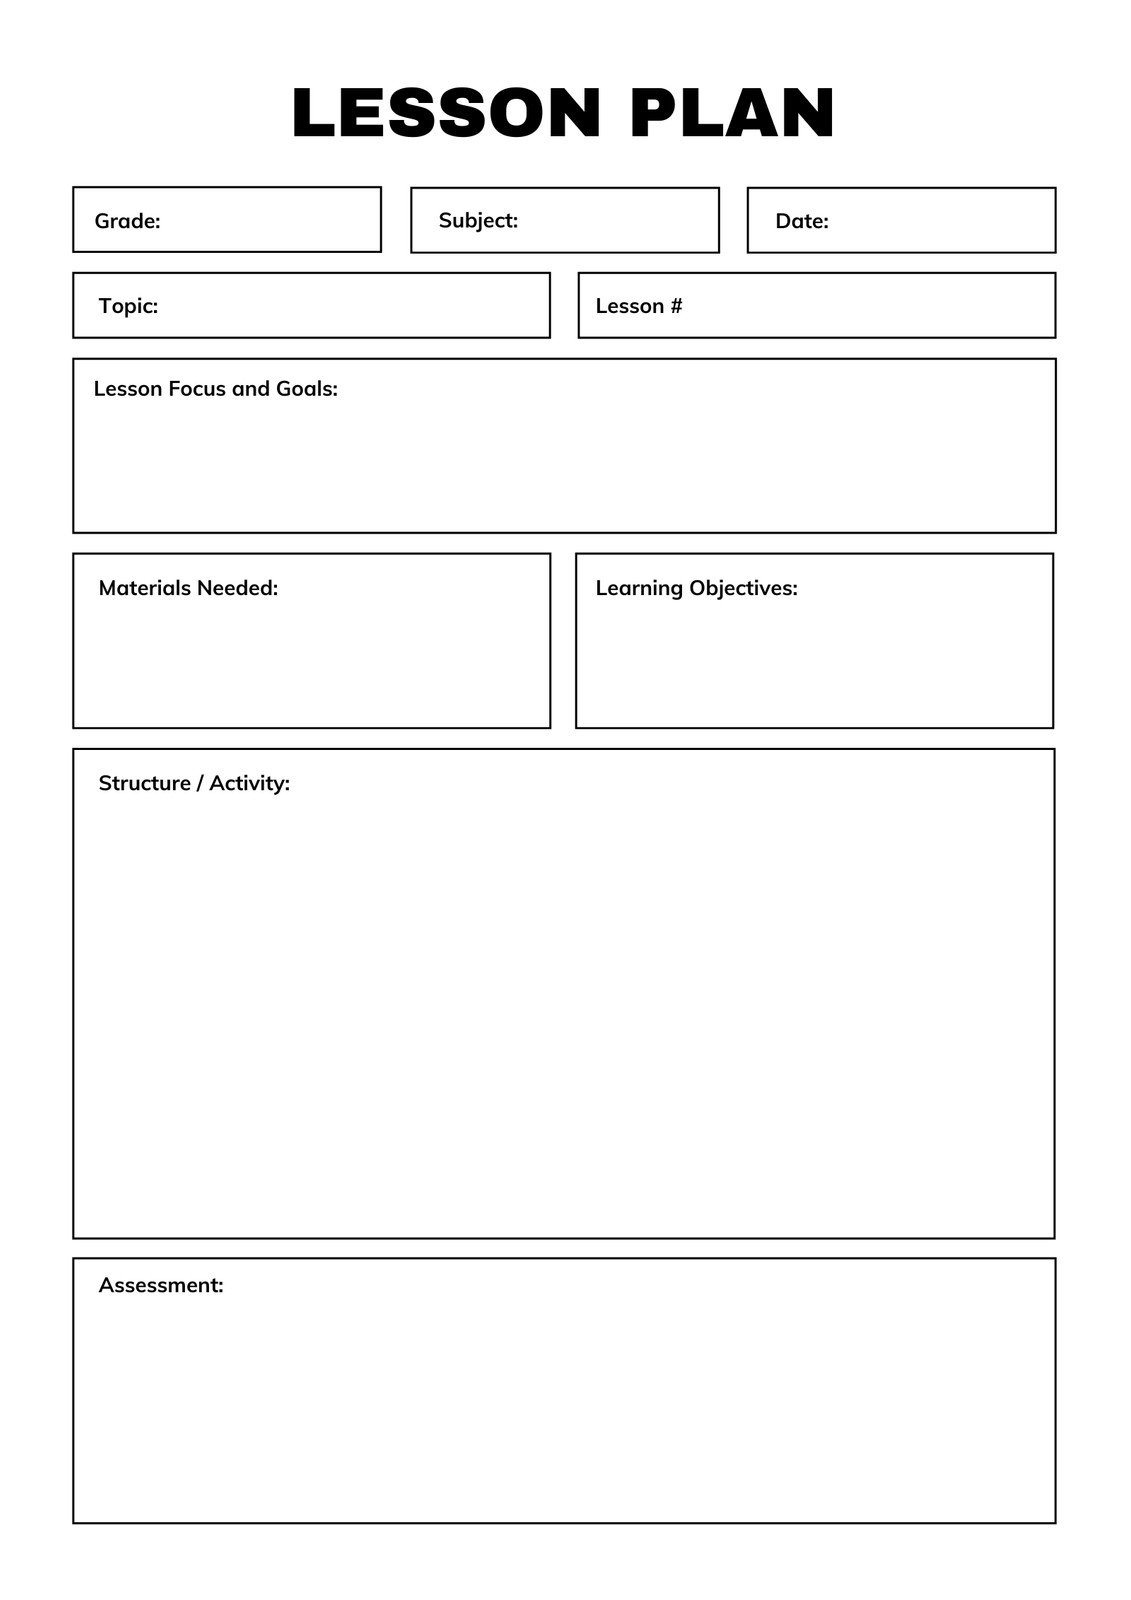 Free, Printable, Customizable Weekly Lesson Plan Templates | Canva within Free Printable Lesson Plan Template Blank